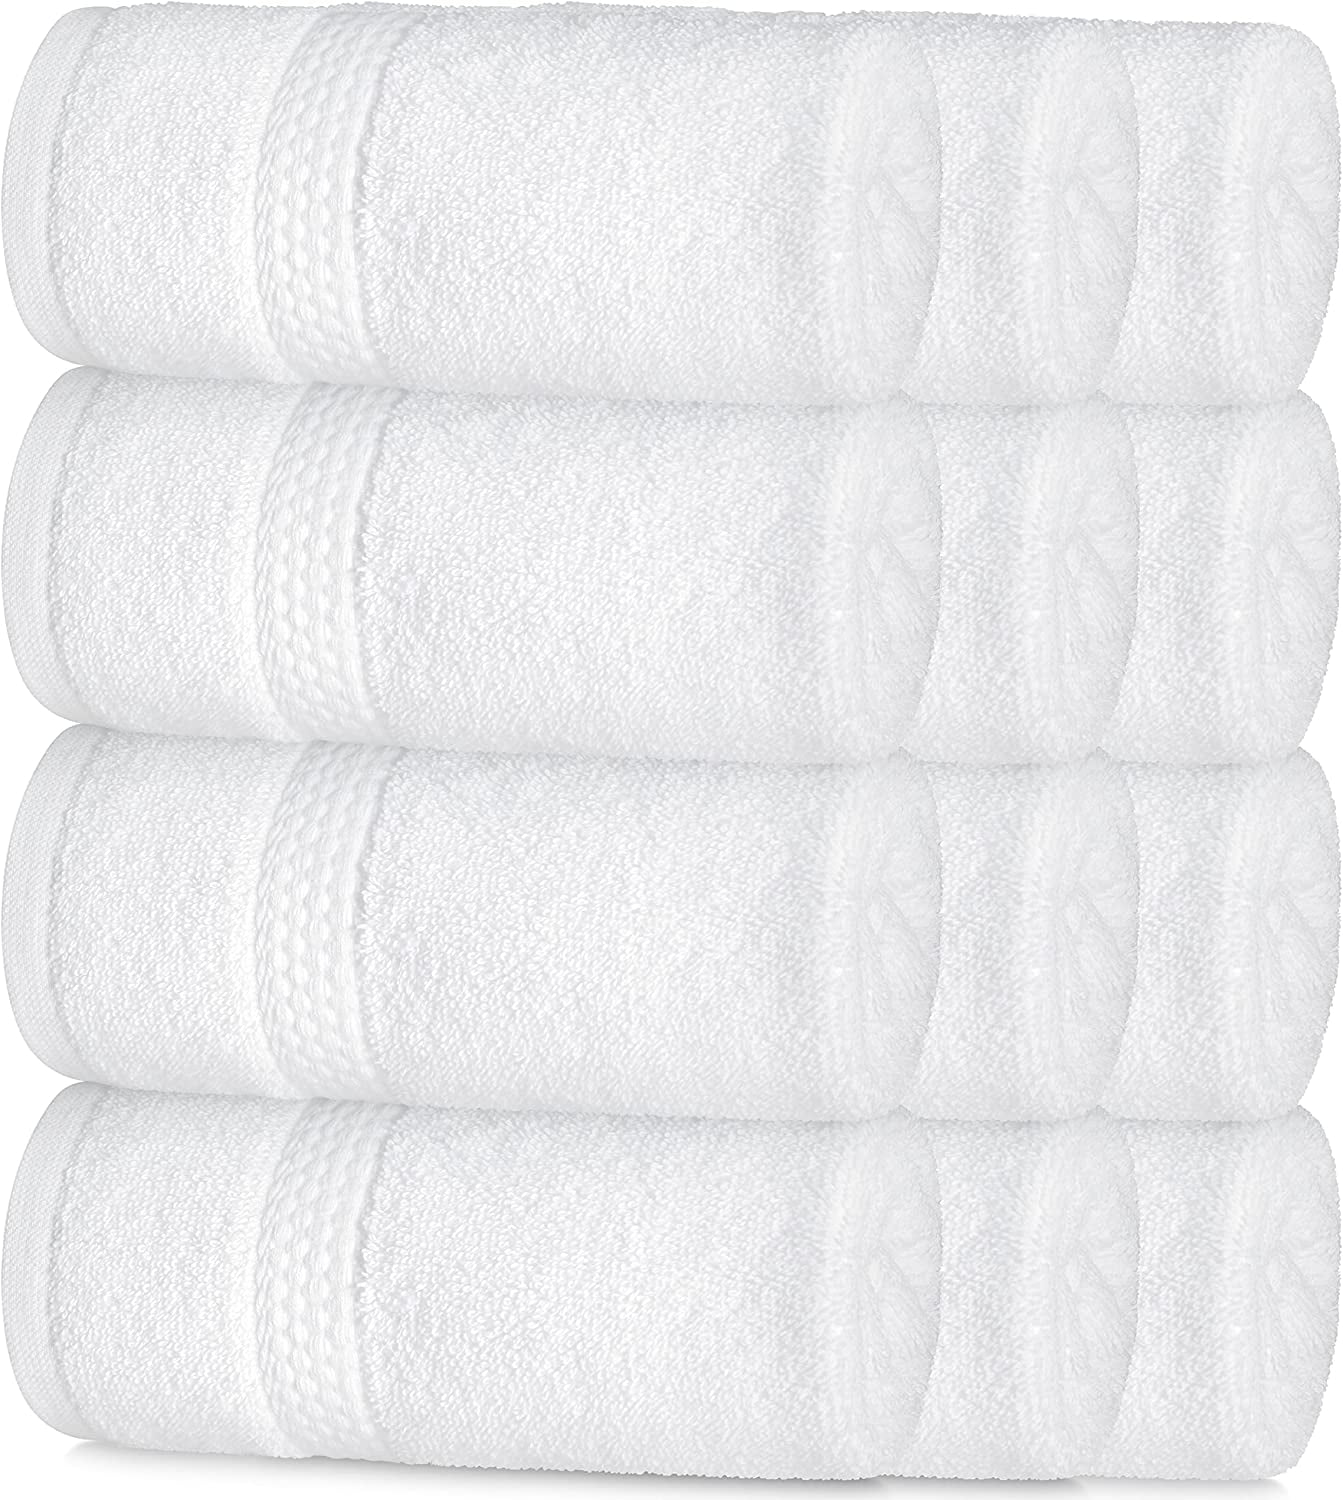  Superio Terry Cloth Rags White Washcloths 100% Cotton 12  Cleaning Cloths, Kitchen Towels, Facial Washcloth, Spa Cloths, Hand Towel,  Small Lint Free Rags for Multi-Purposes (6 Pack) : Health & Household